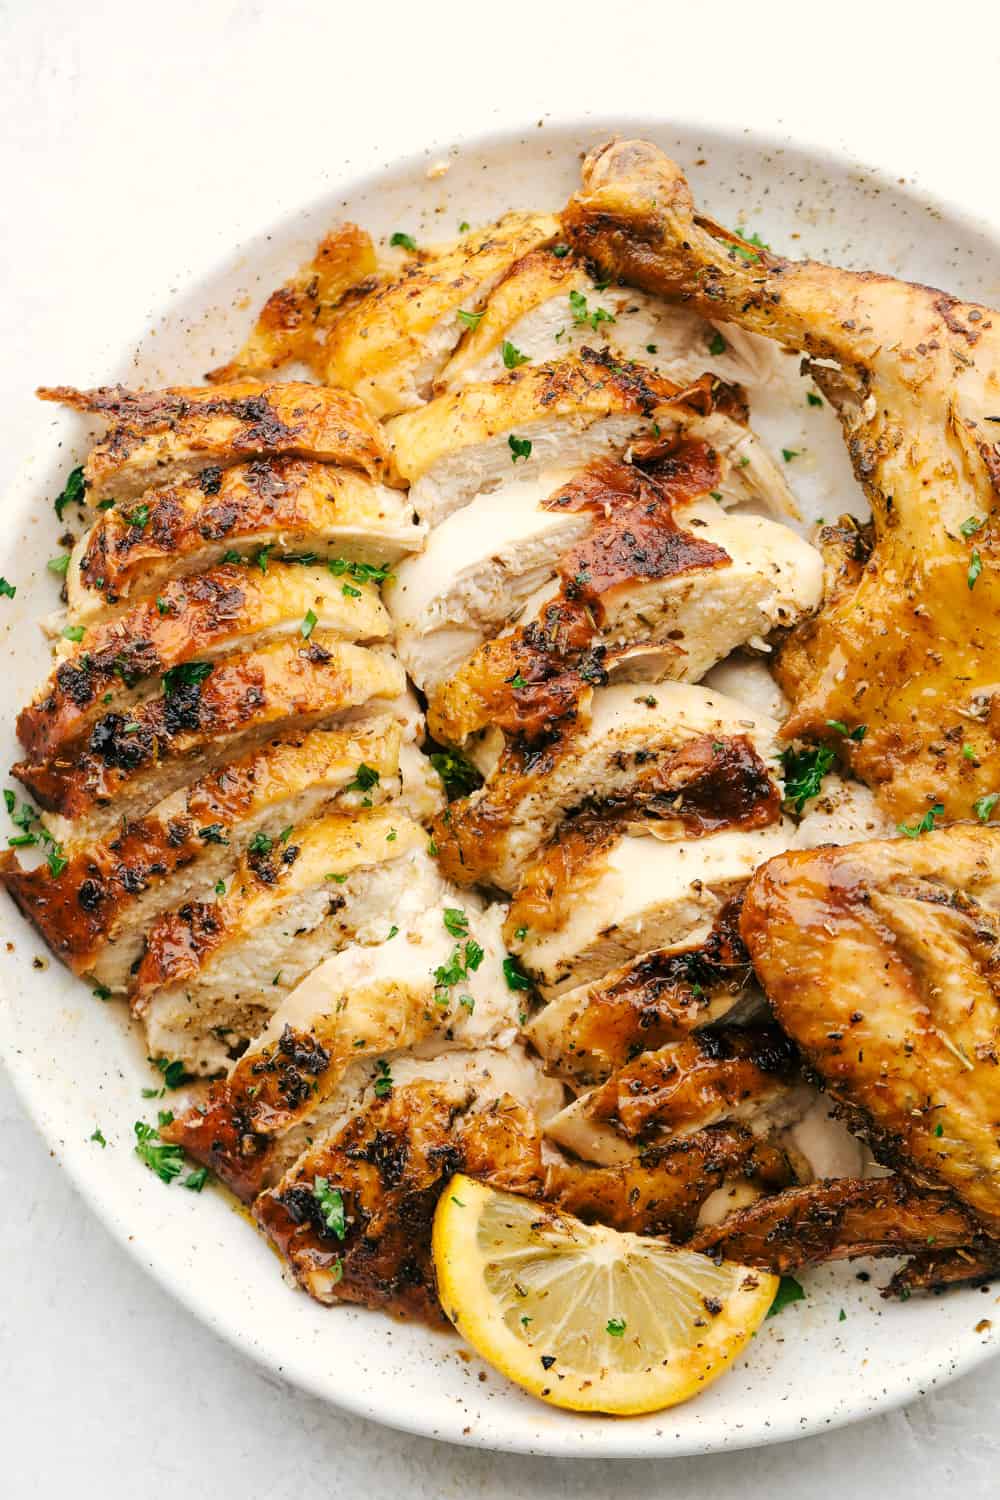 Sliced juicy chicken on a plate with a wedge of lemon.